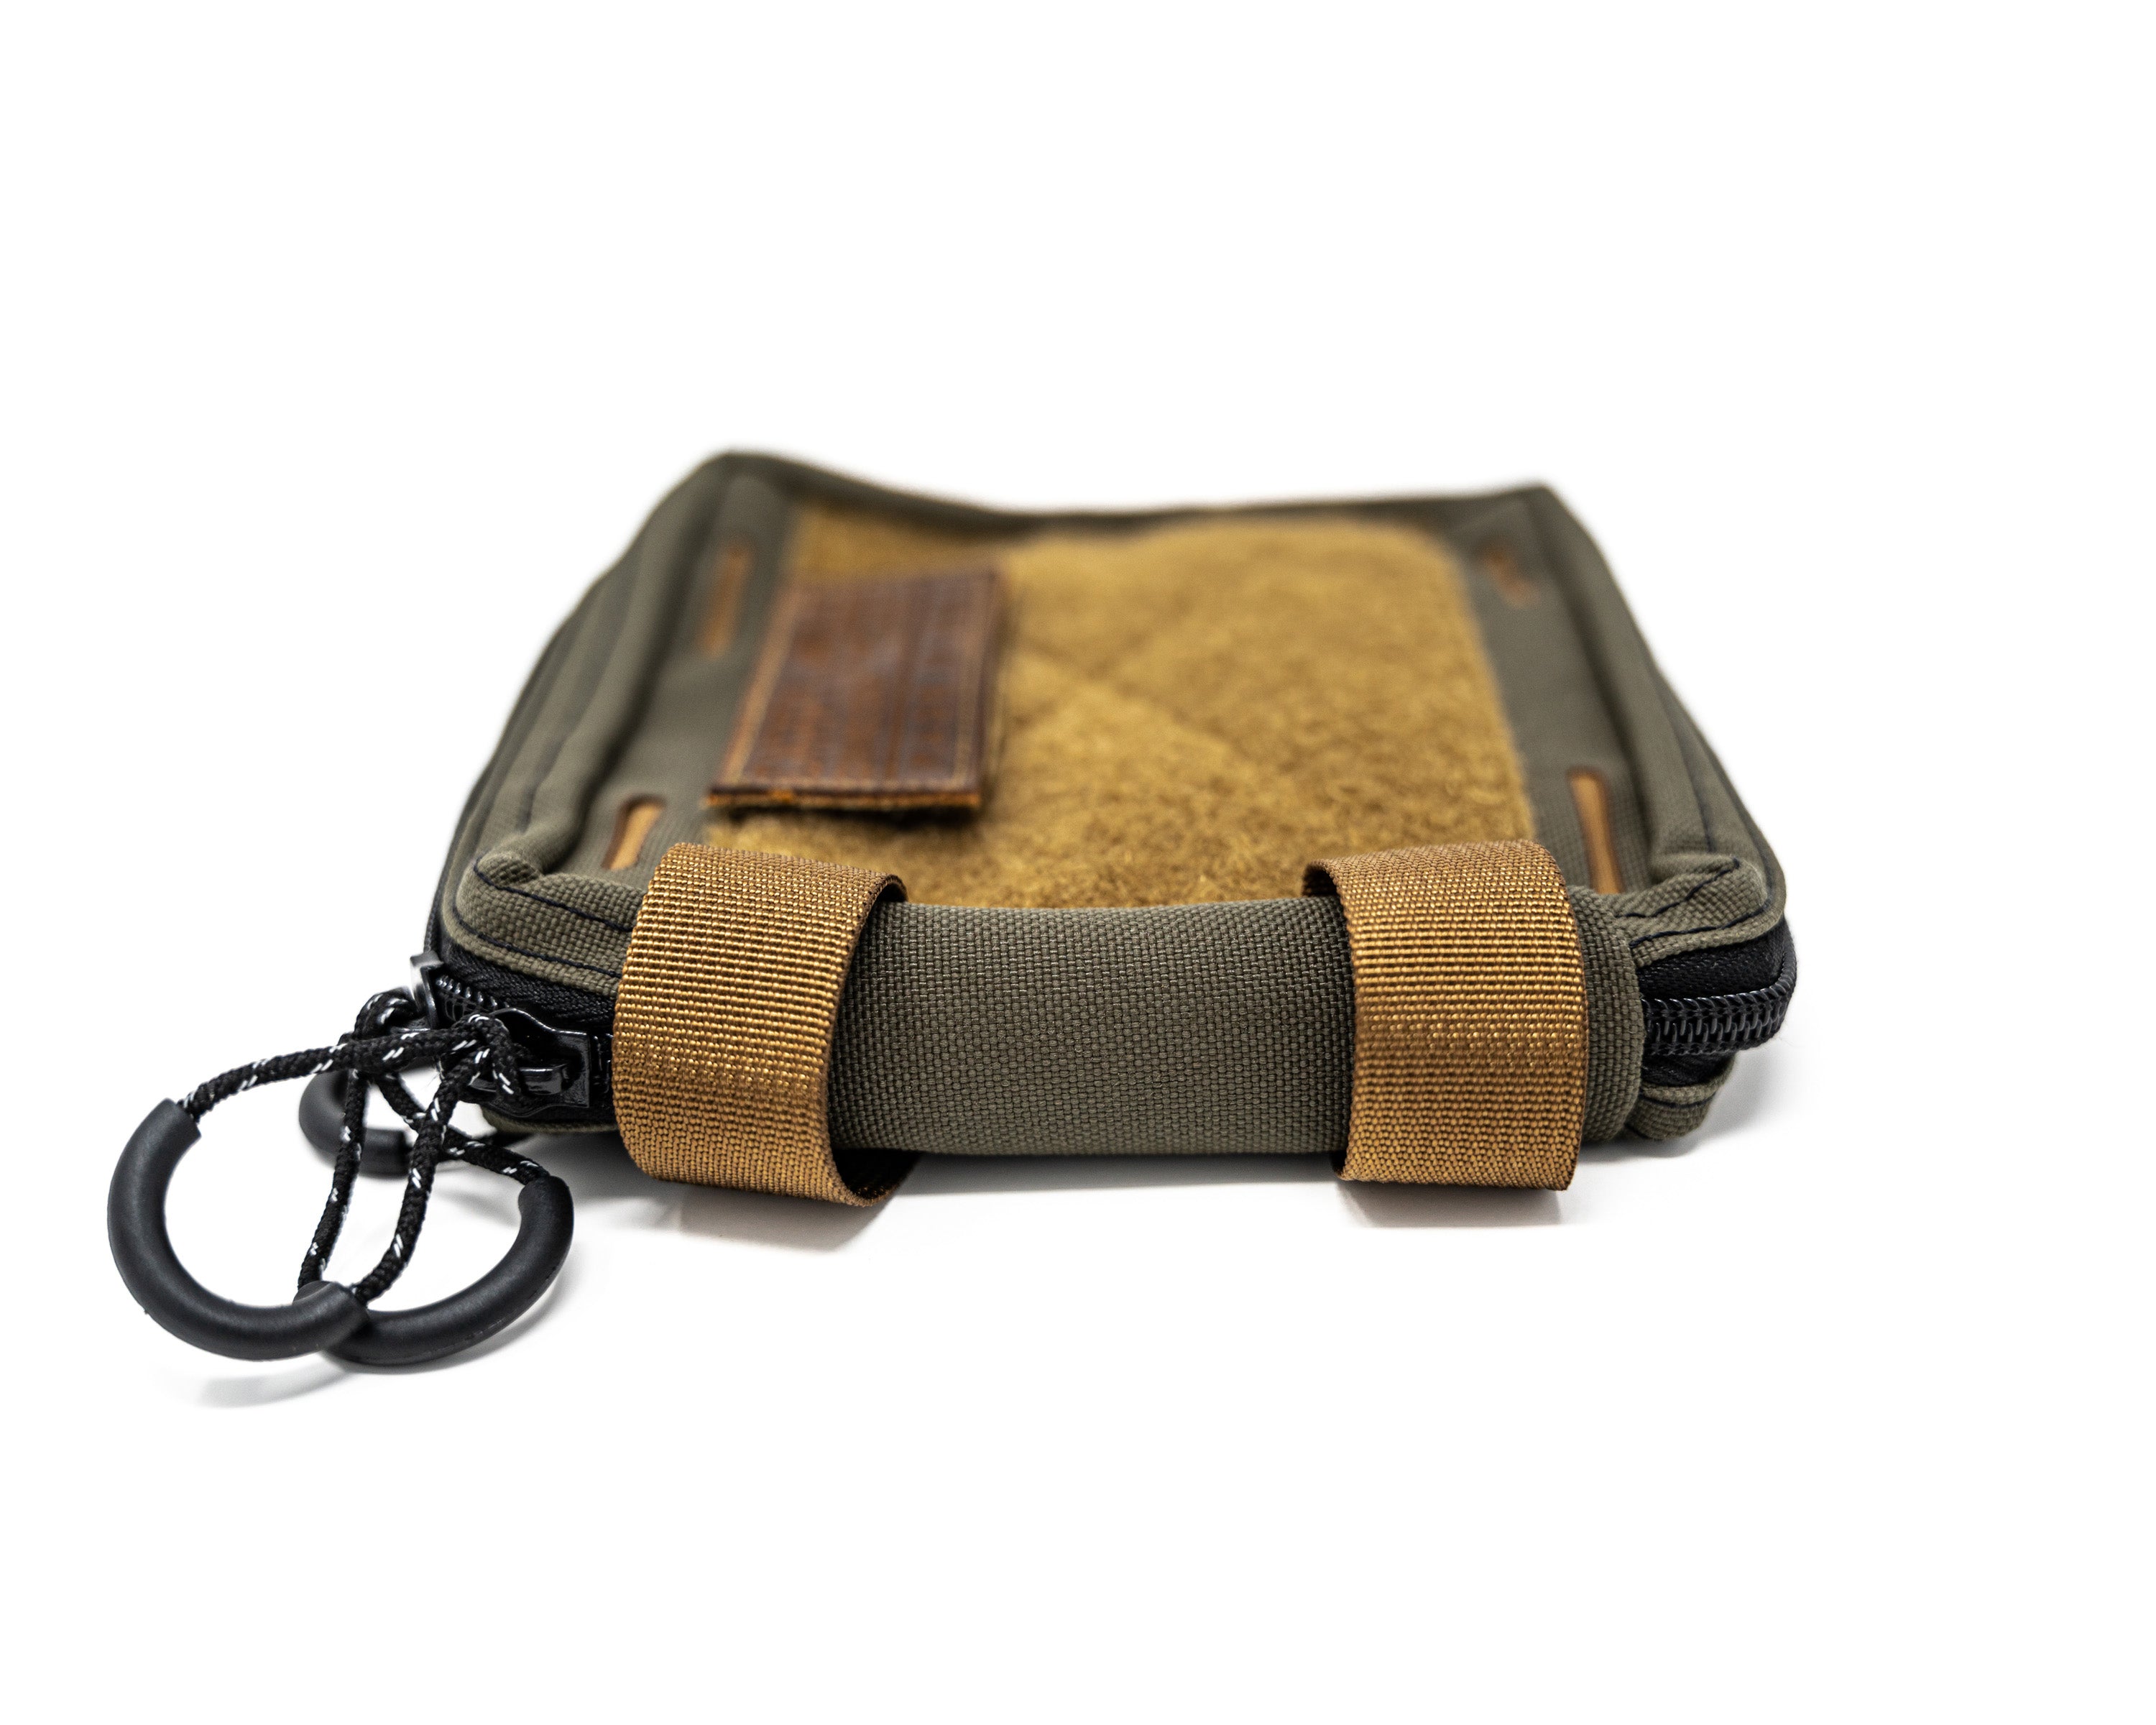 Carry Commission / Blue Ridge Overland Gear EDC Pouch Bundle side view of zipper pulls and attachment loops